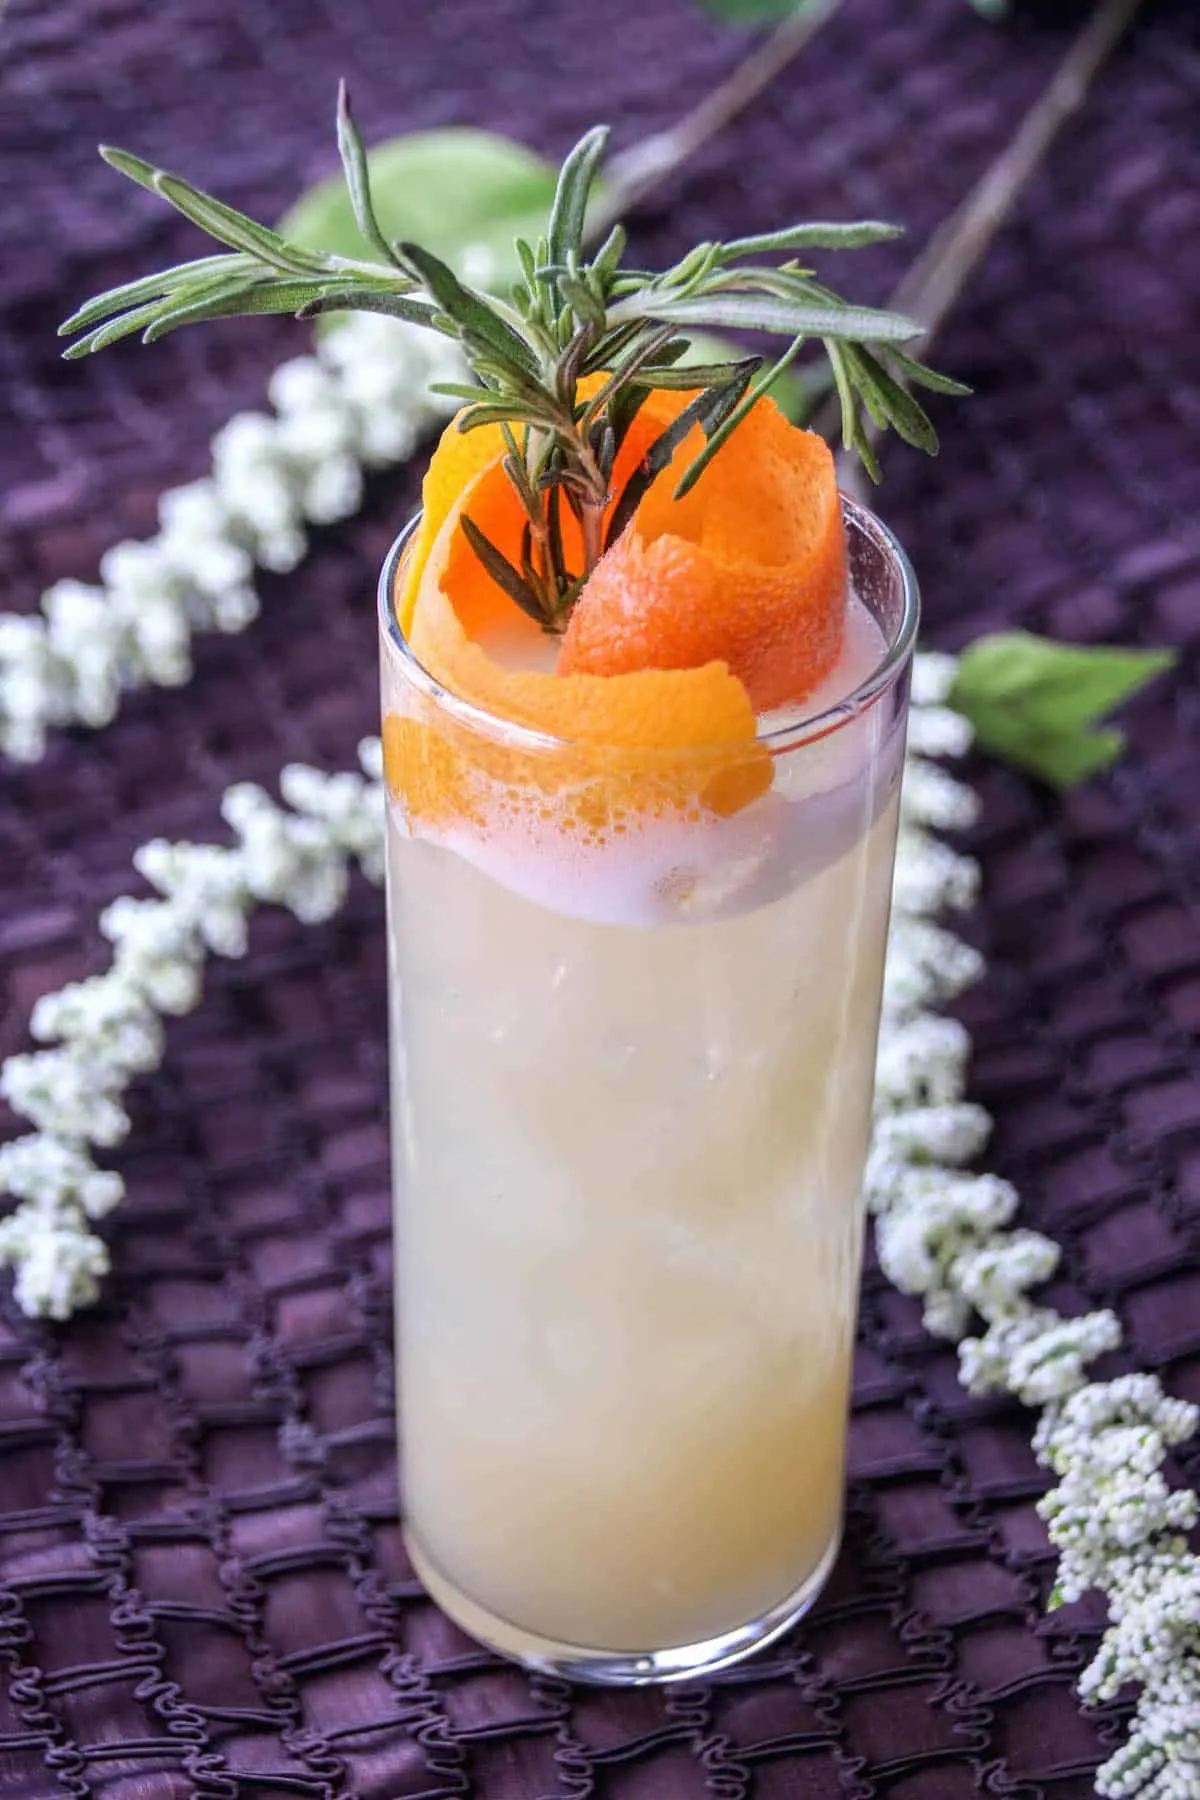 Coconut cocktail with vodka